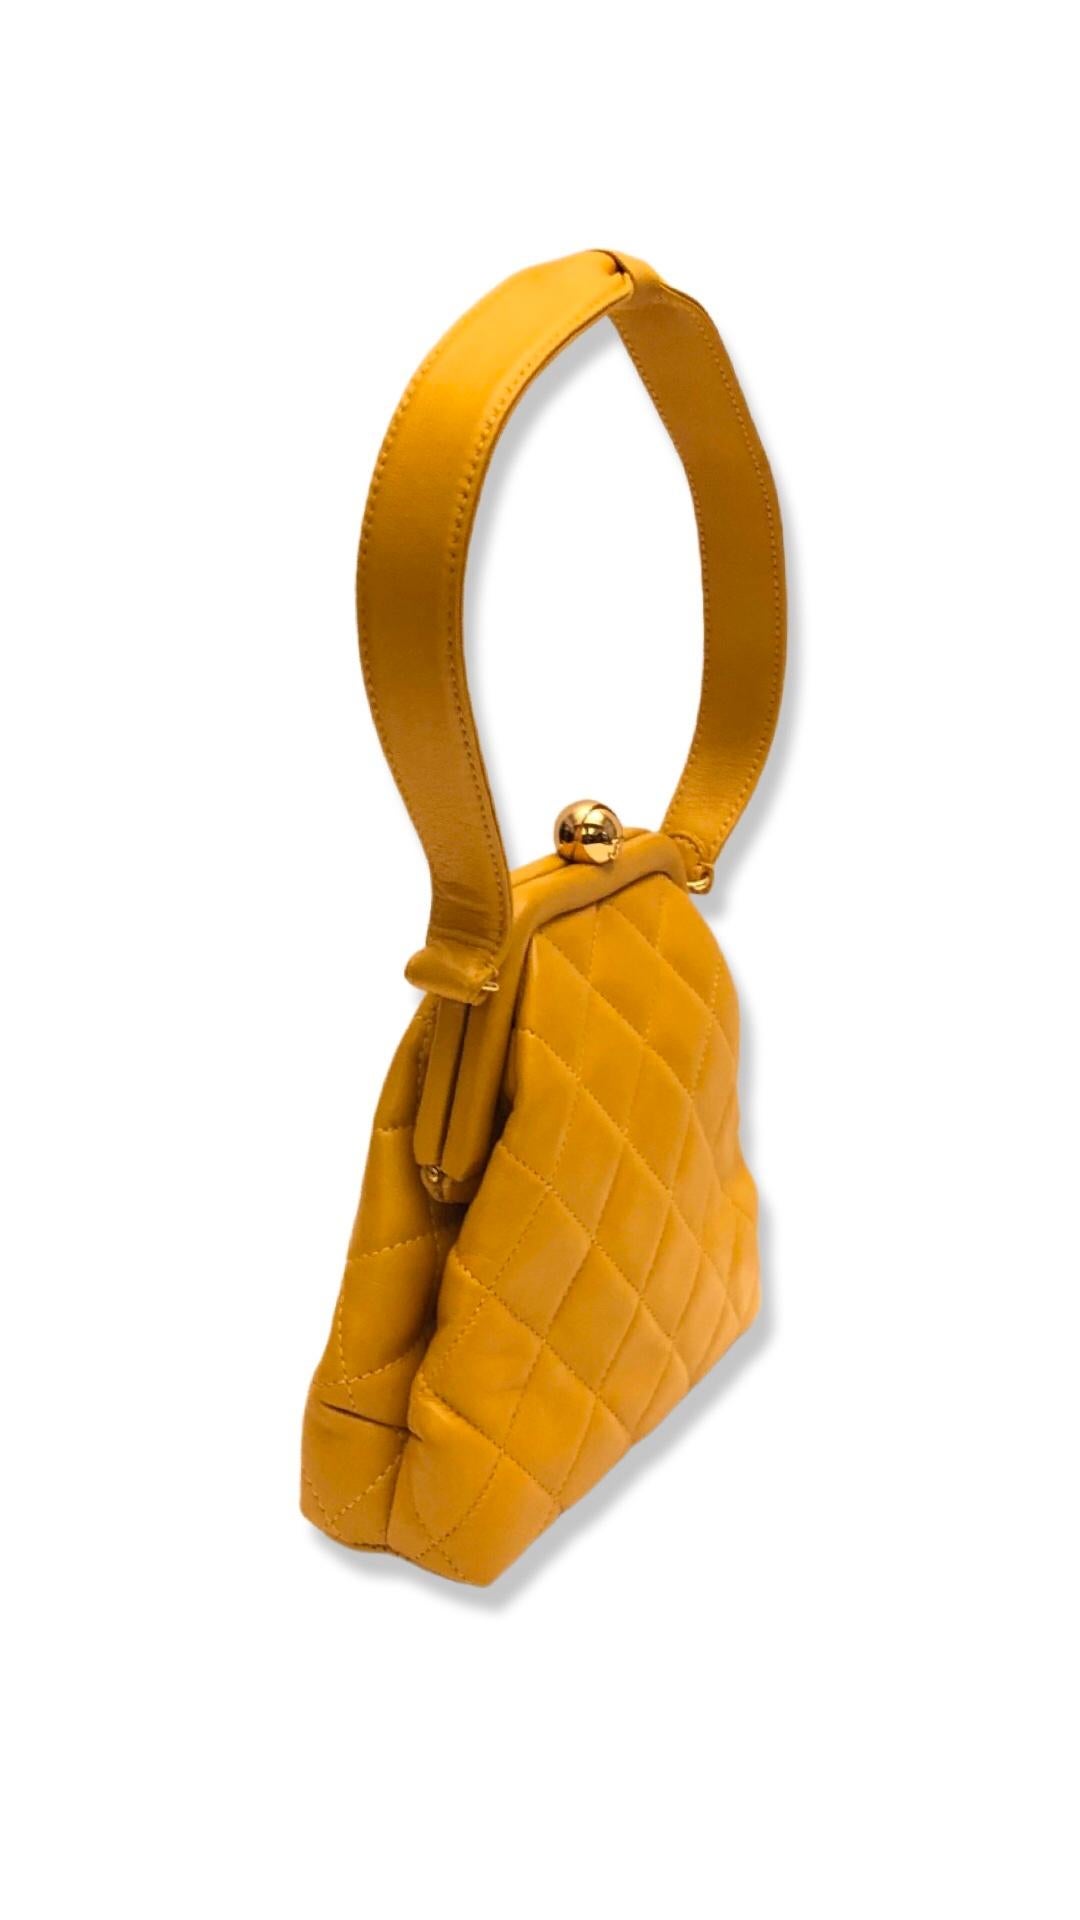 - Vintage Chanel mustard yellow quilted lambskin purse handbag from year 1994-1996 collection. 

- CC gold hardware kiss-lock closure. 

- One slip pocket closure. 

- 16cm x 16cm c 5cm. Handle drop: 20cm.

- Comes with authenticity card, serial